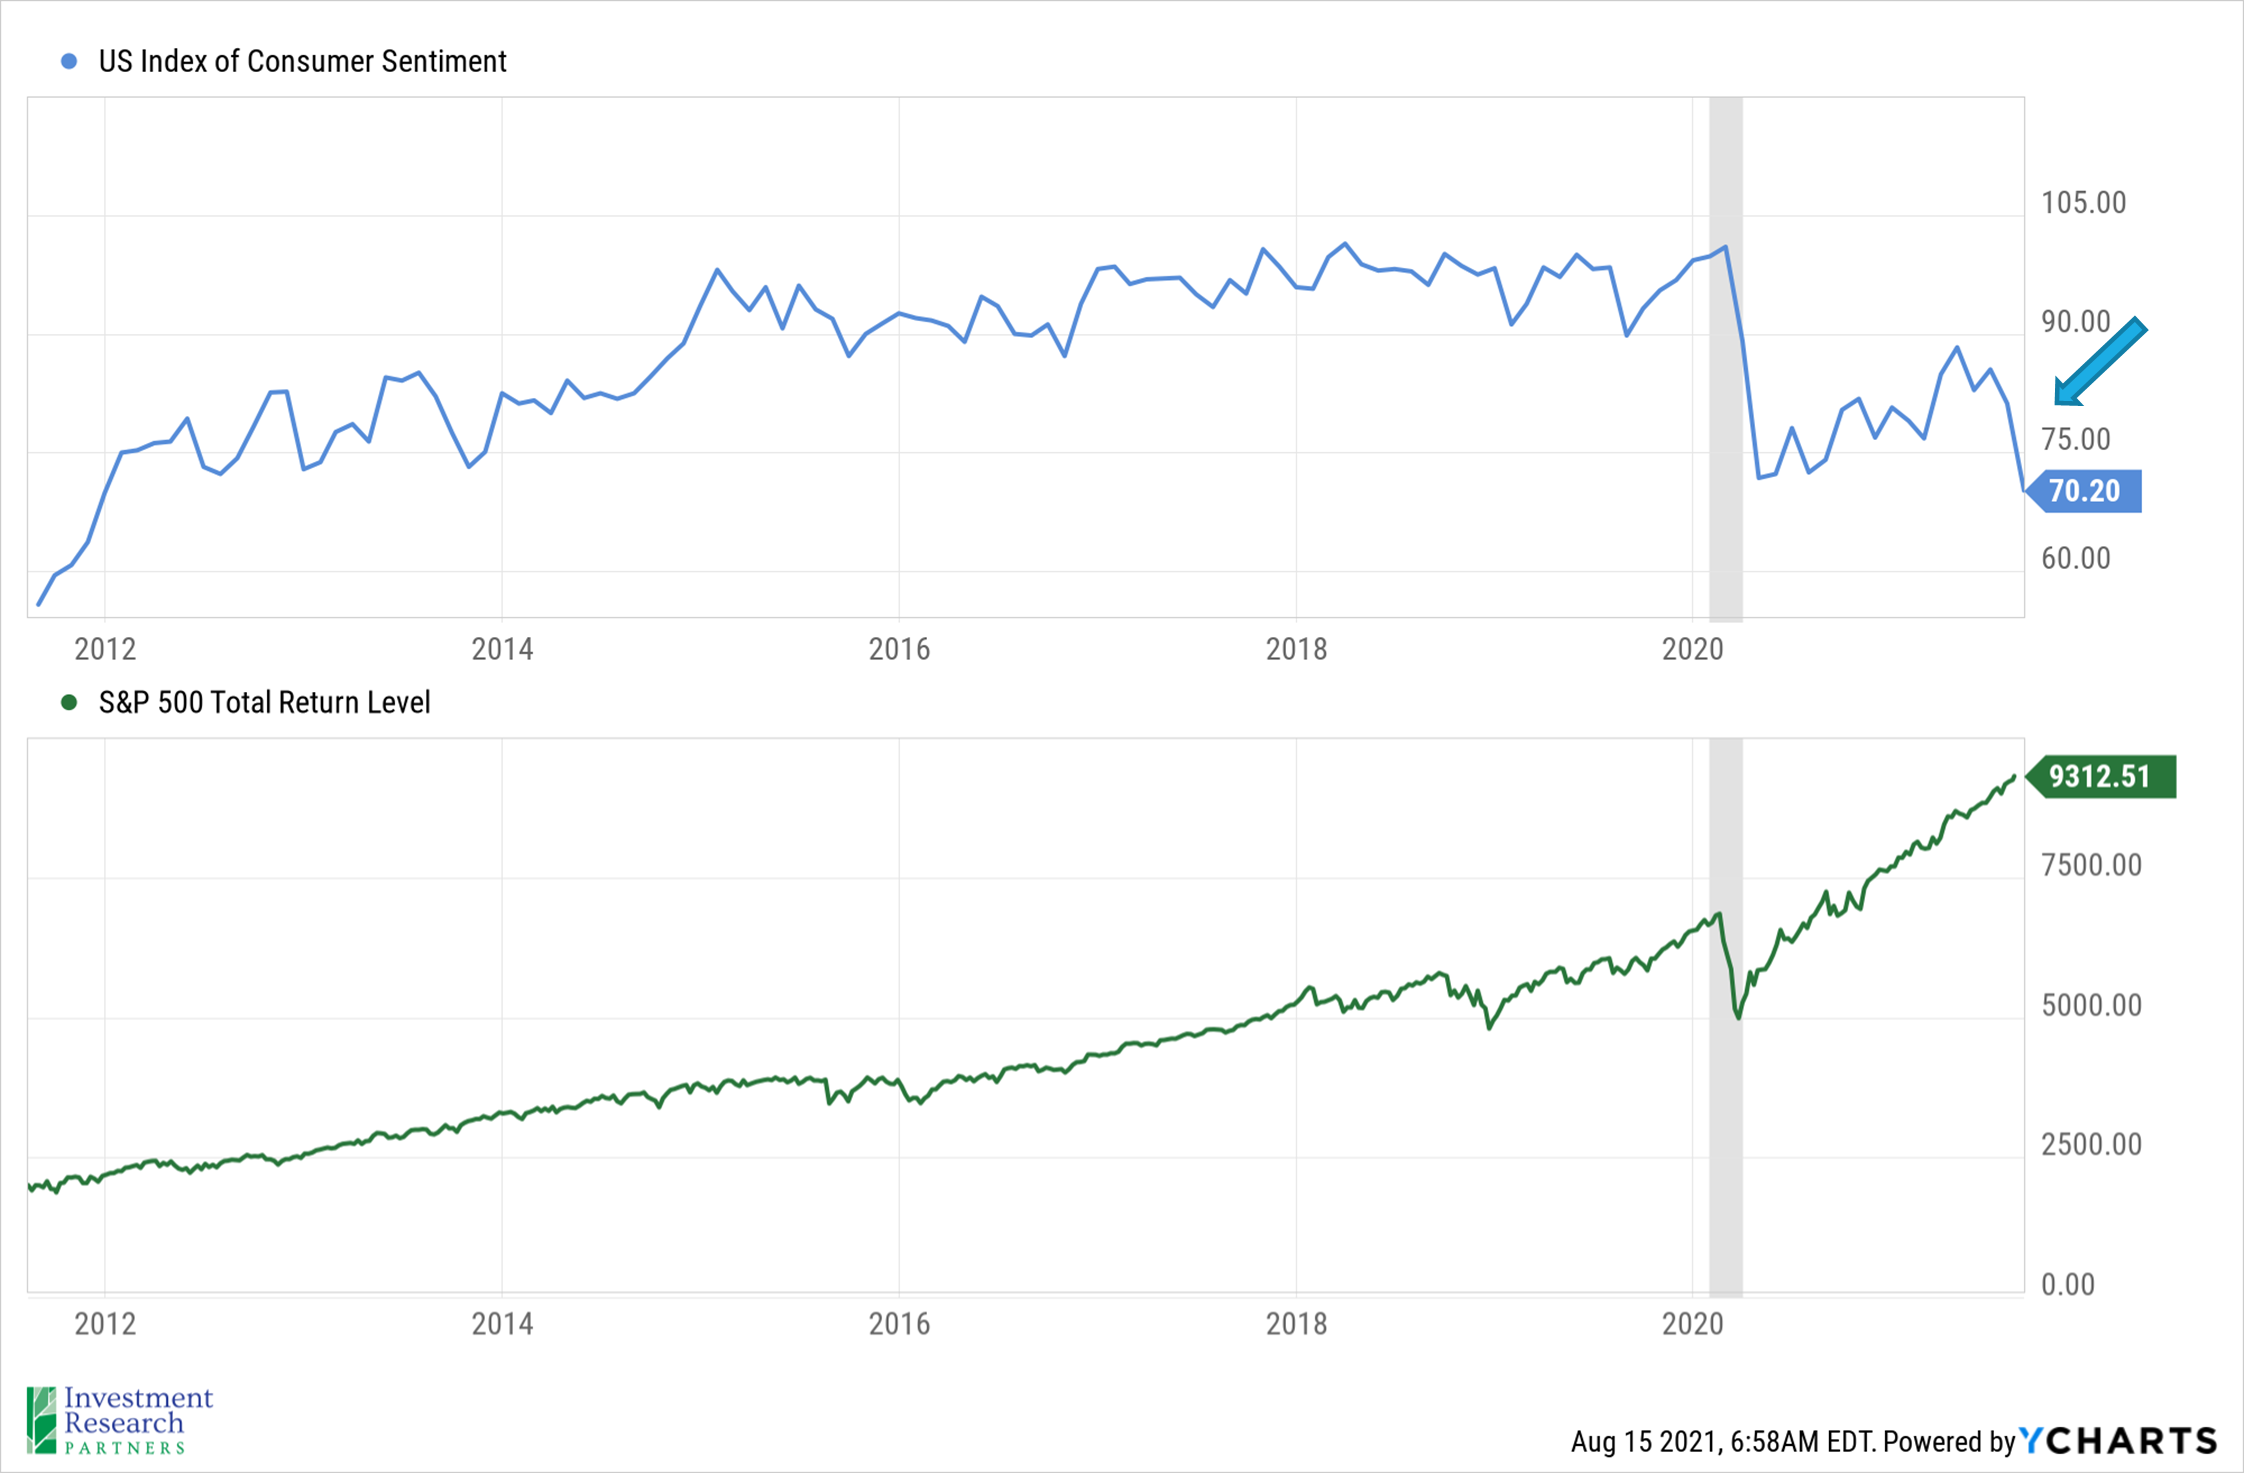 Line graph depicting US Index of Consumer Sentiment from 2012 to 2021 and line graph depicting S&P 500 Total Return Level from 2012 to 2021